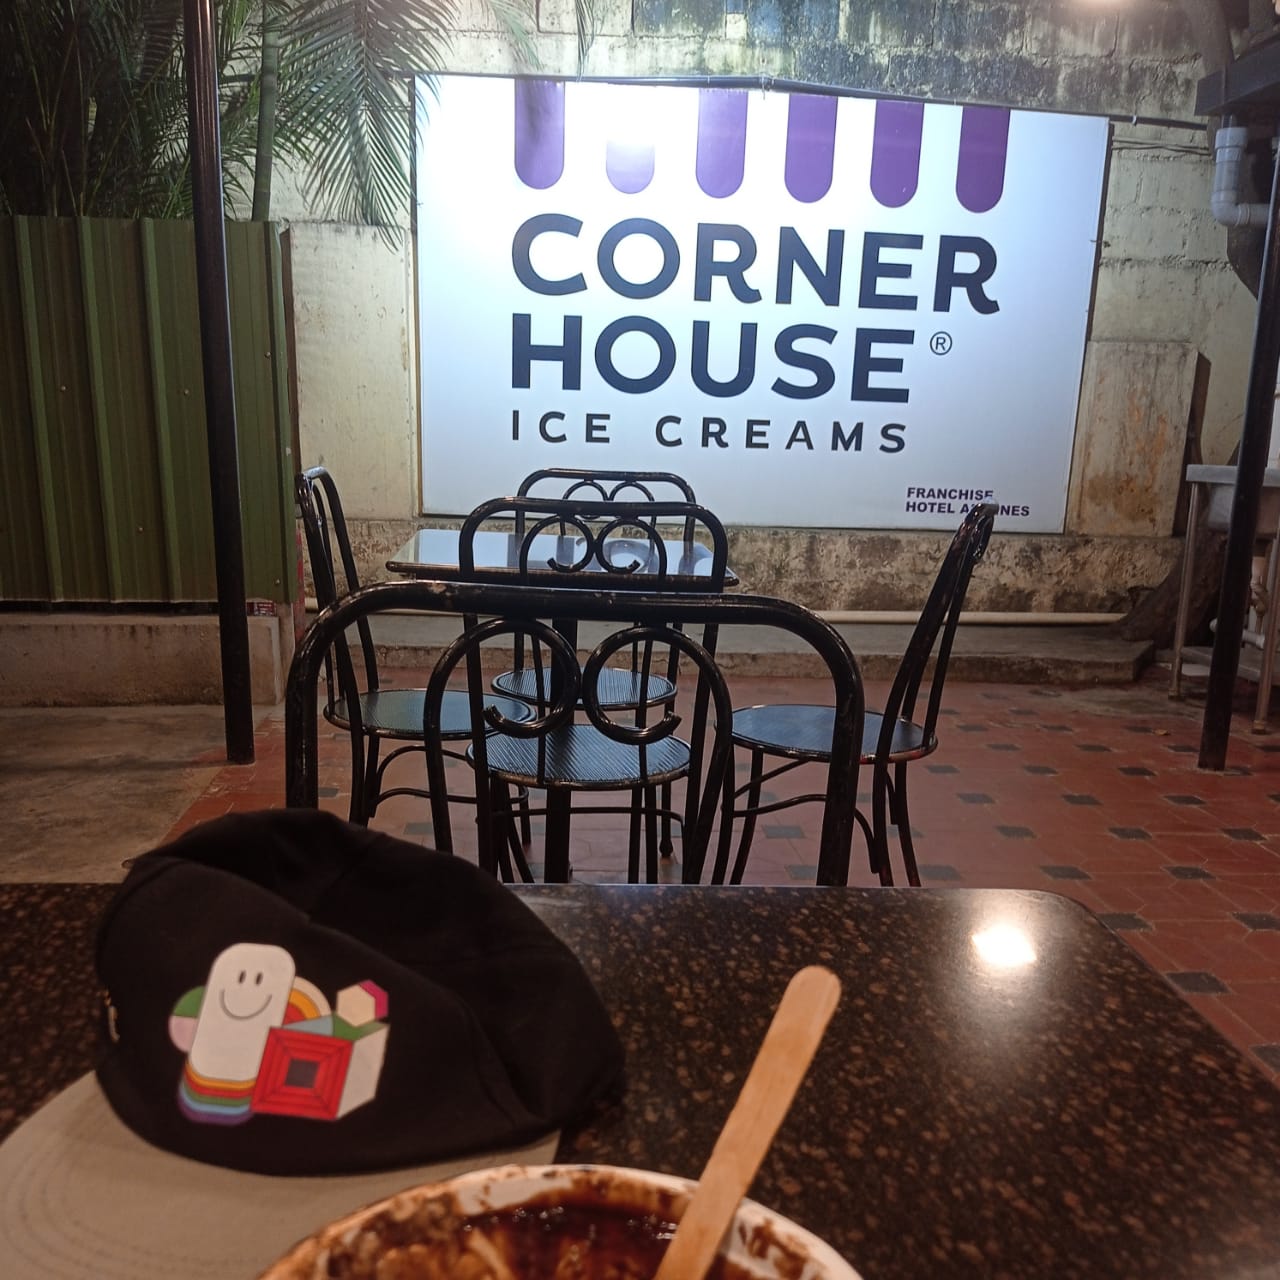 Ice cream @ Corner House is a must-try; just heavenly stuff.